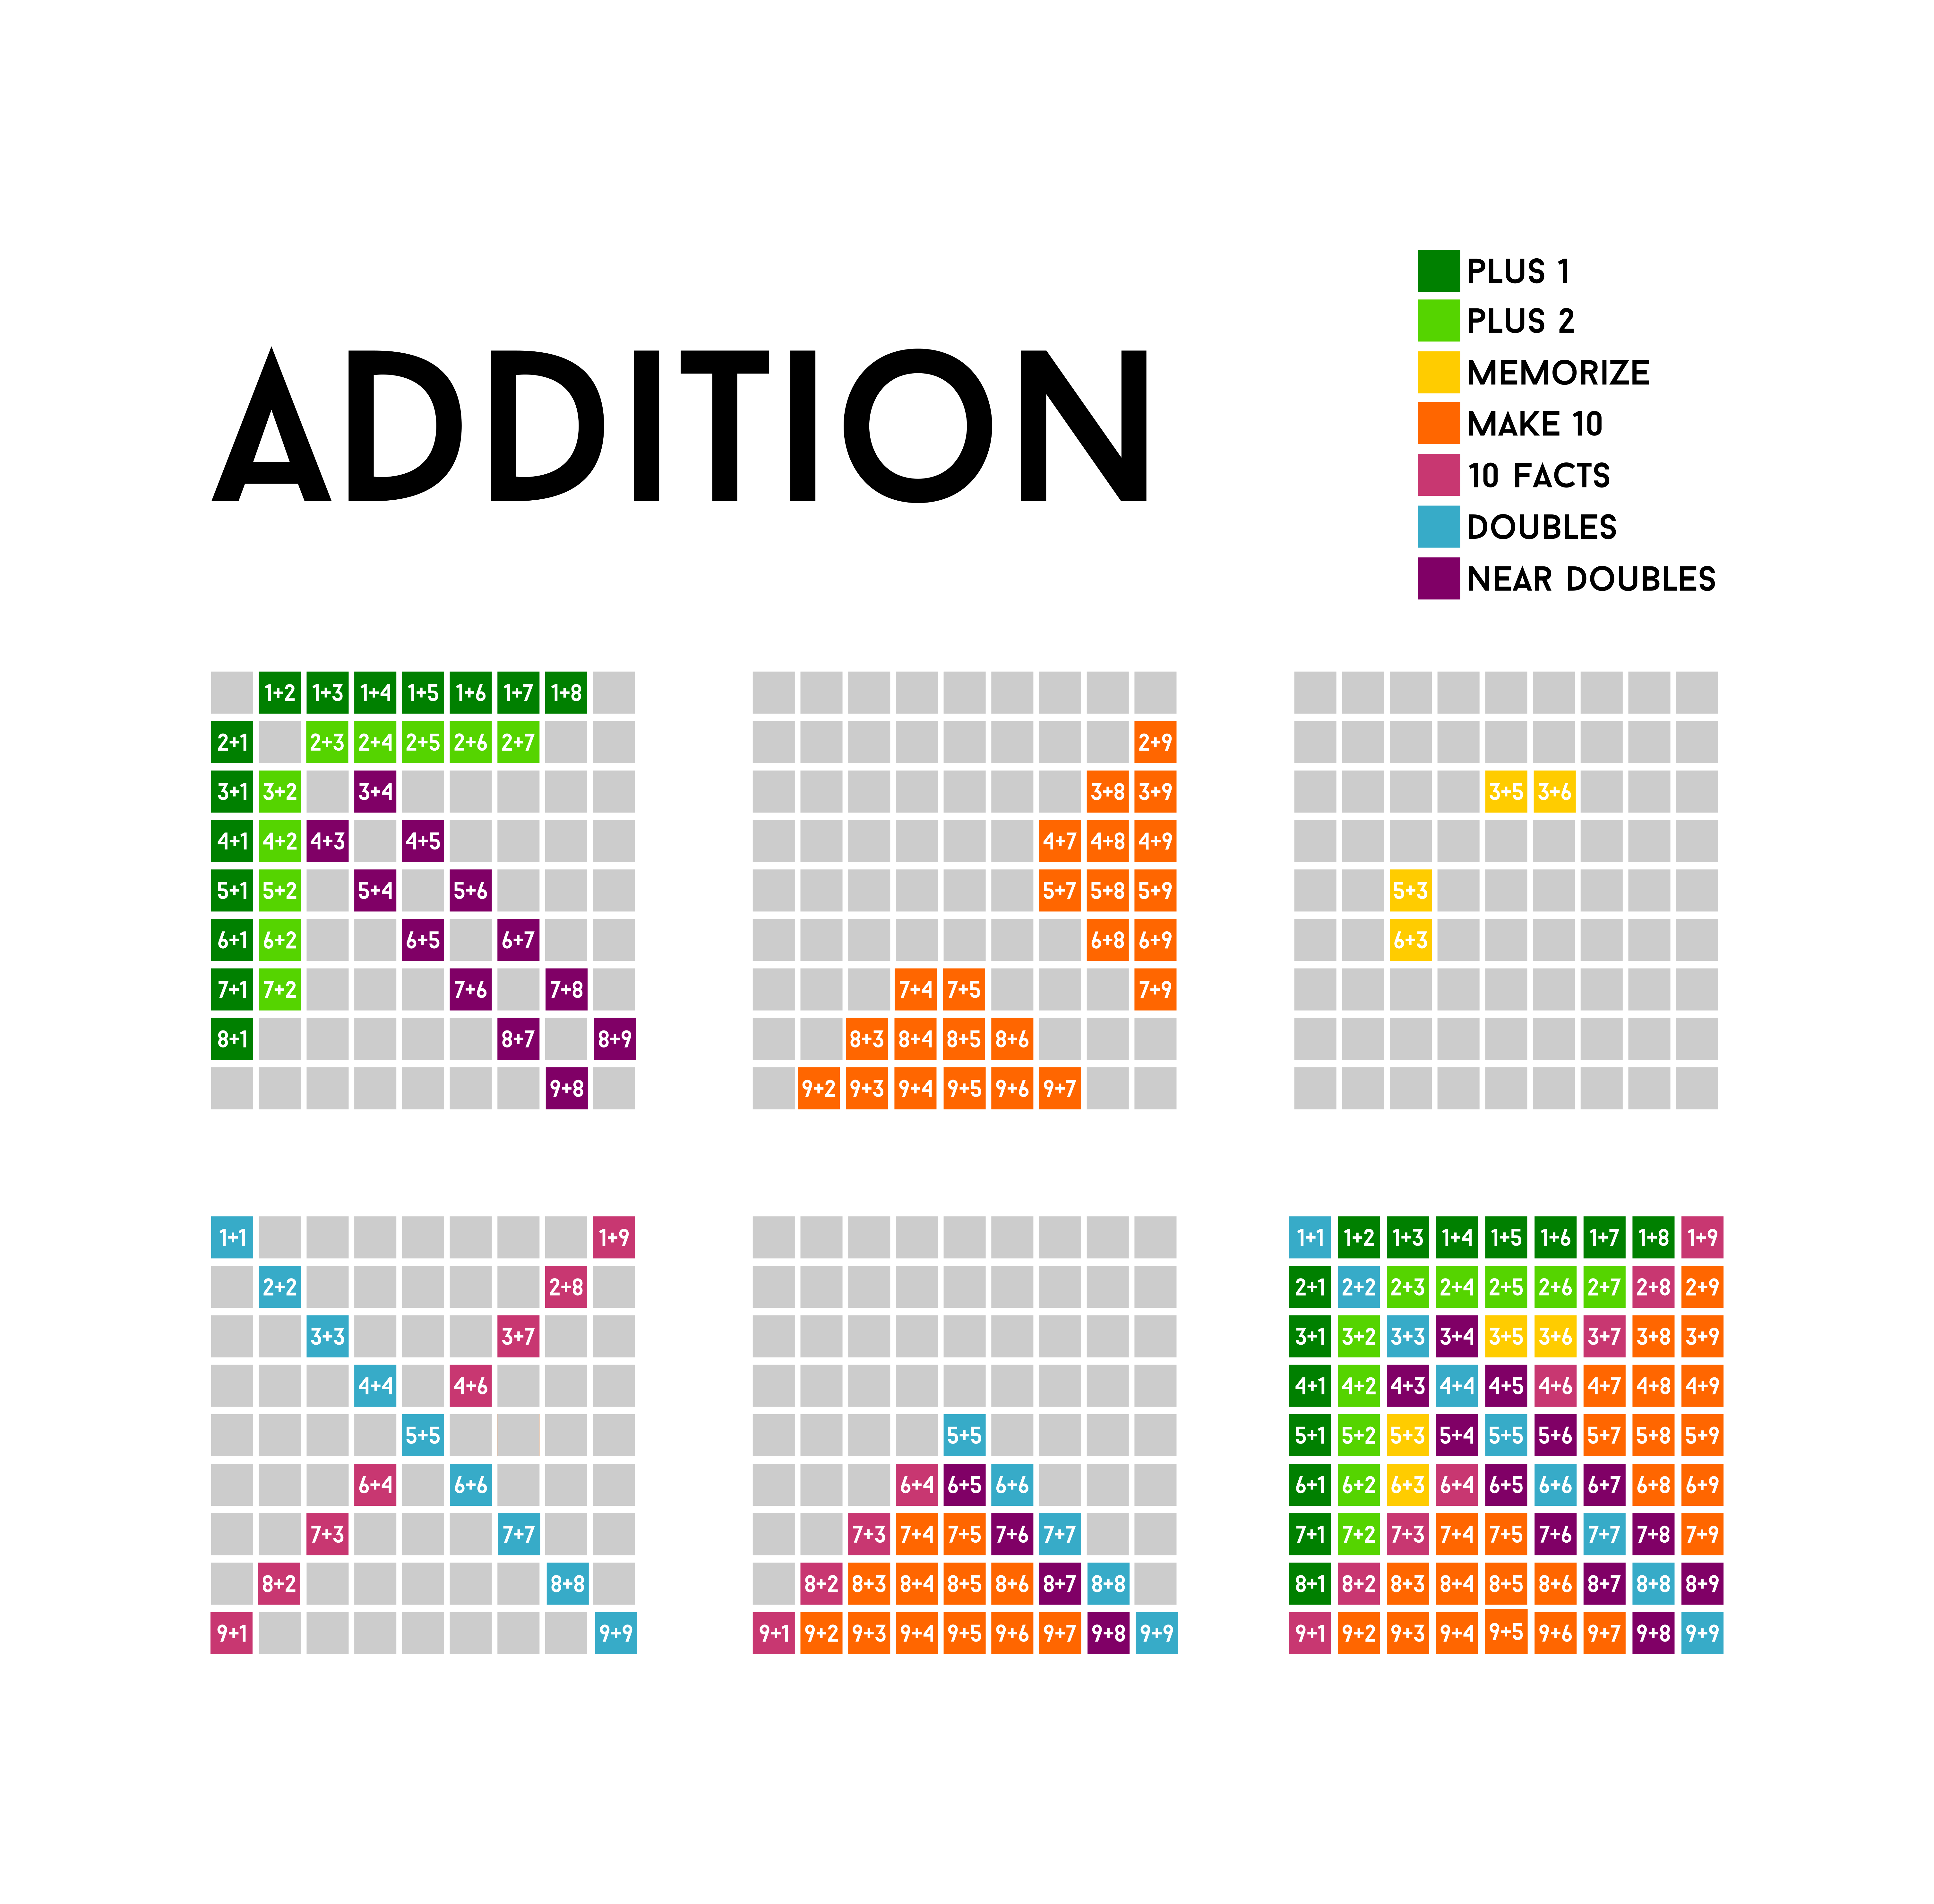 addition_full.png